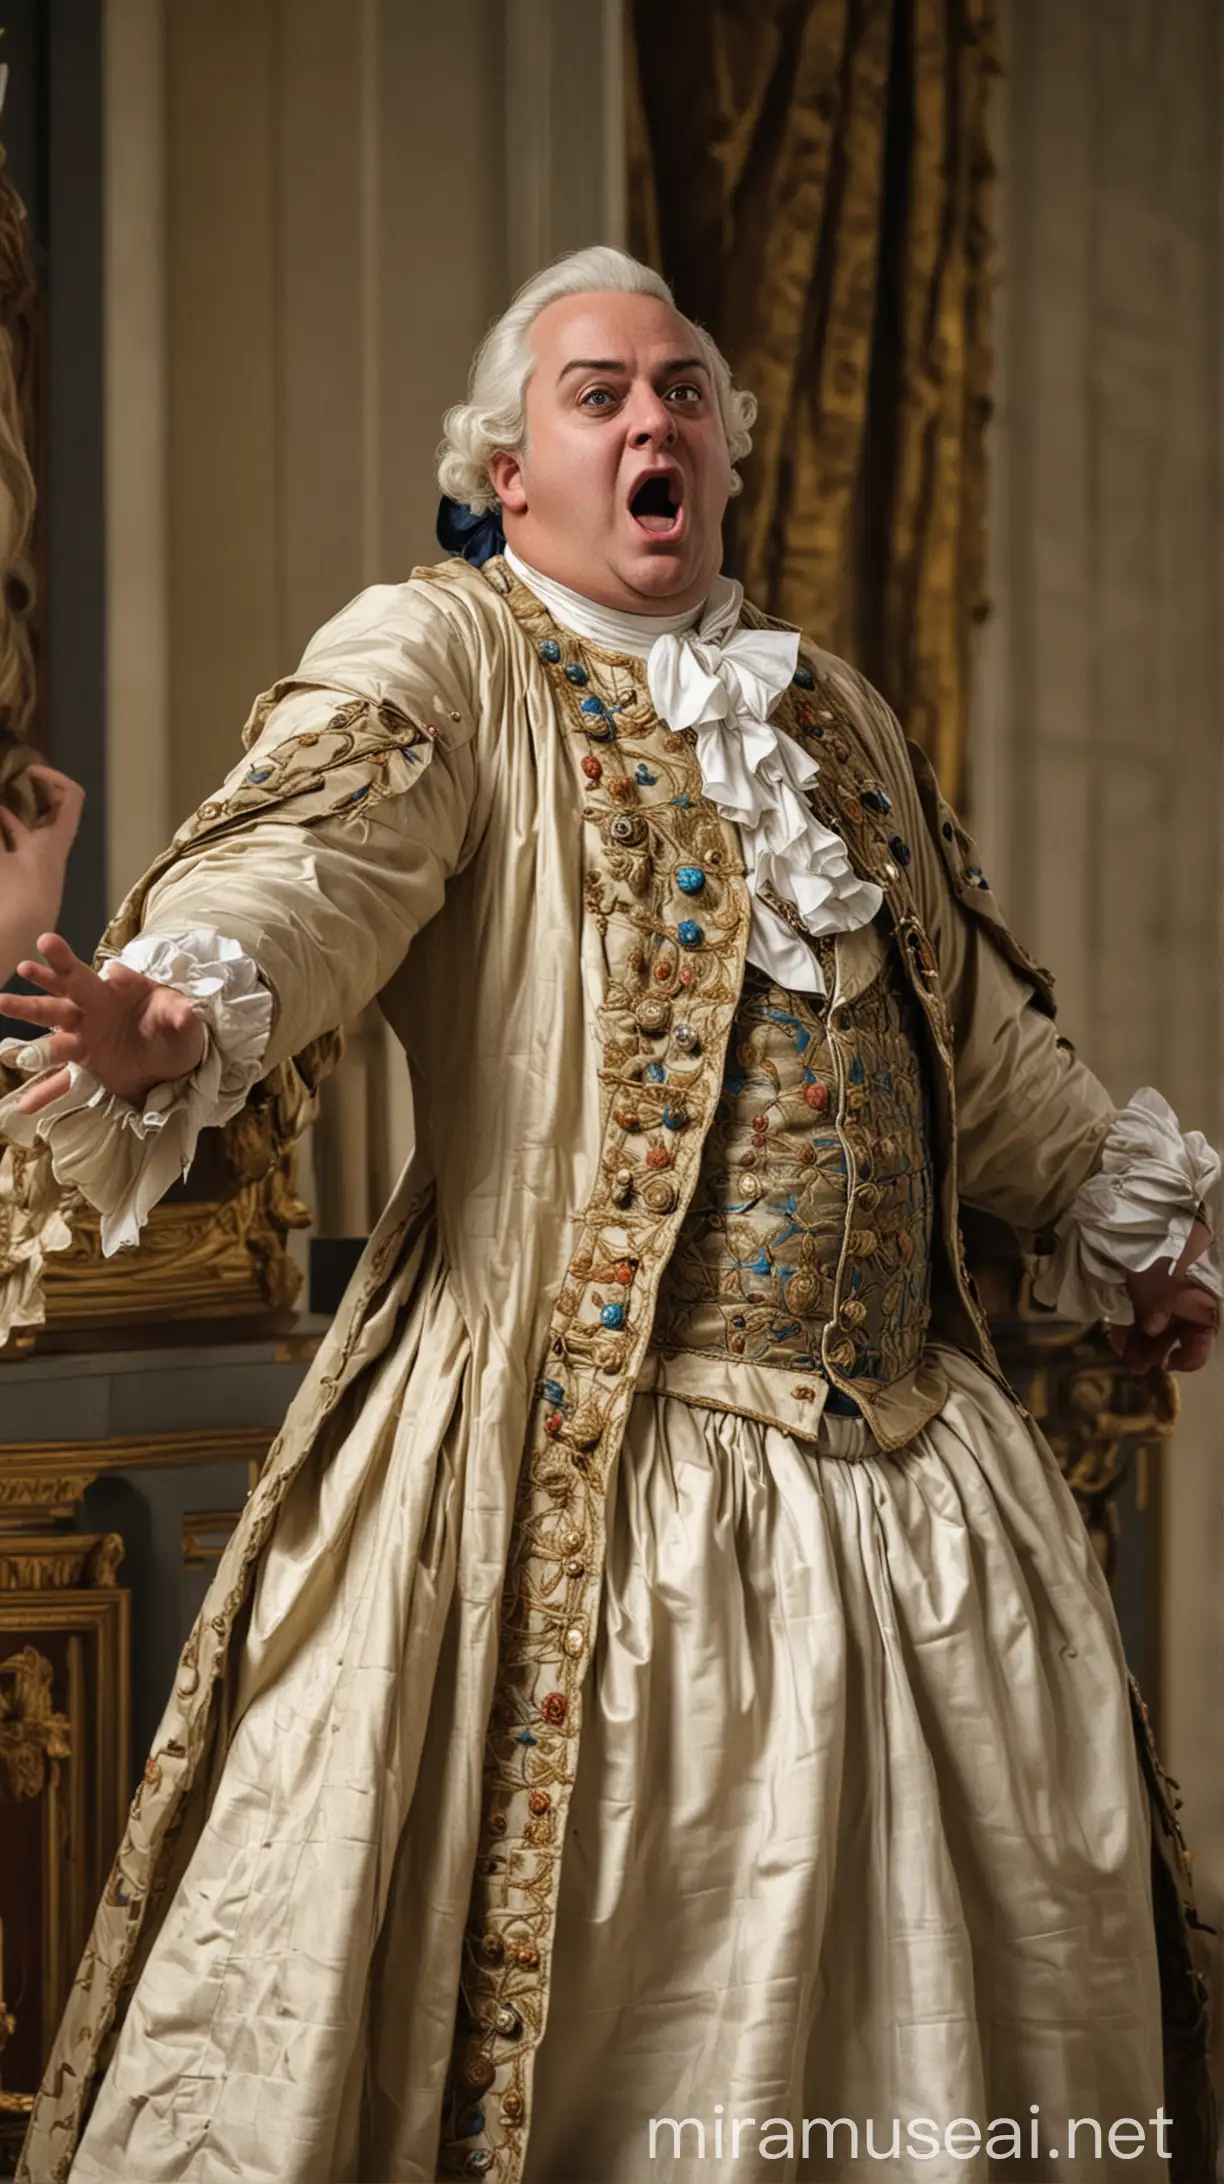 King Louis XVI Shocked at the Revolutions Outcomes